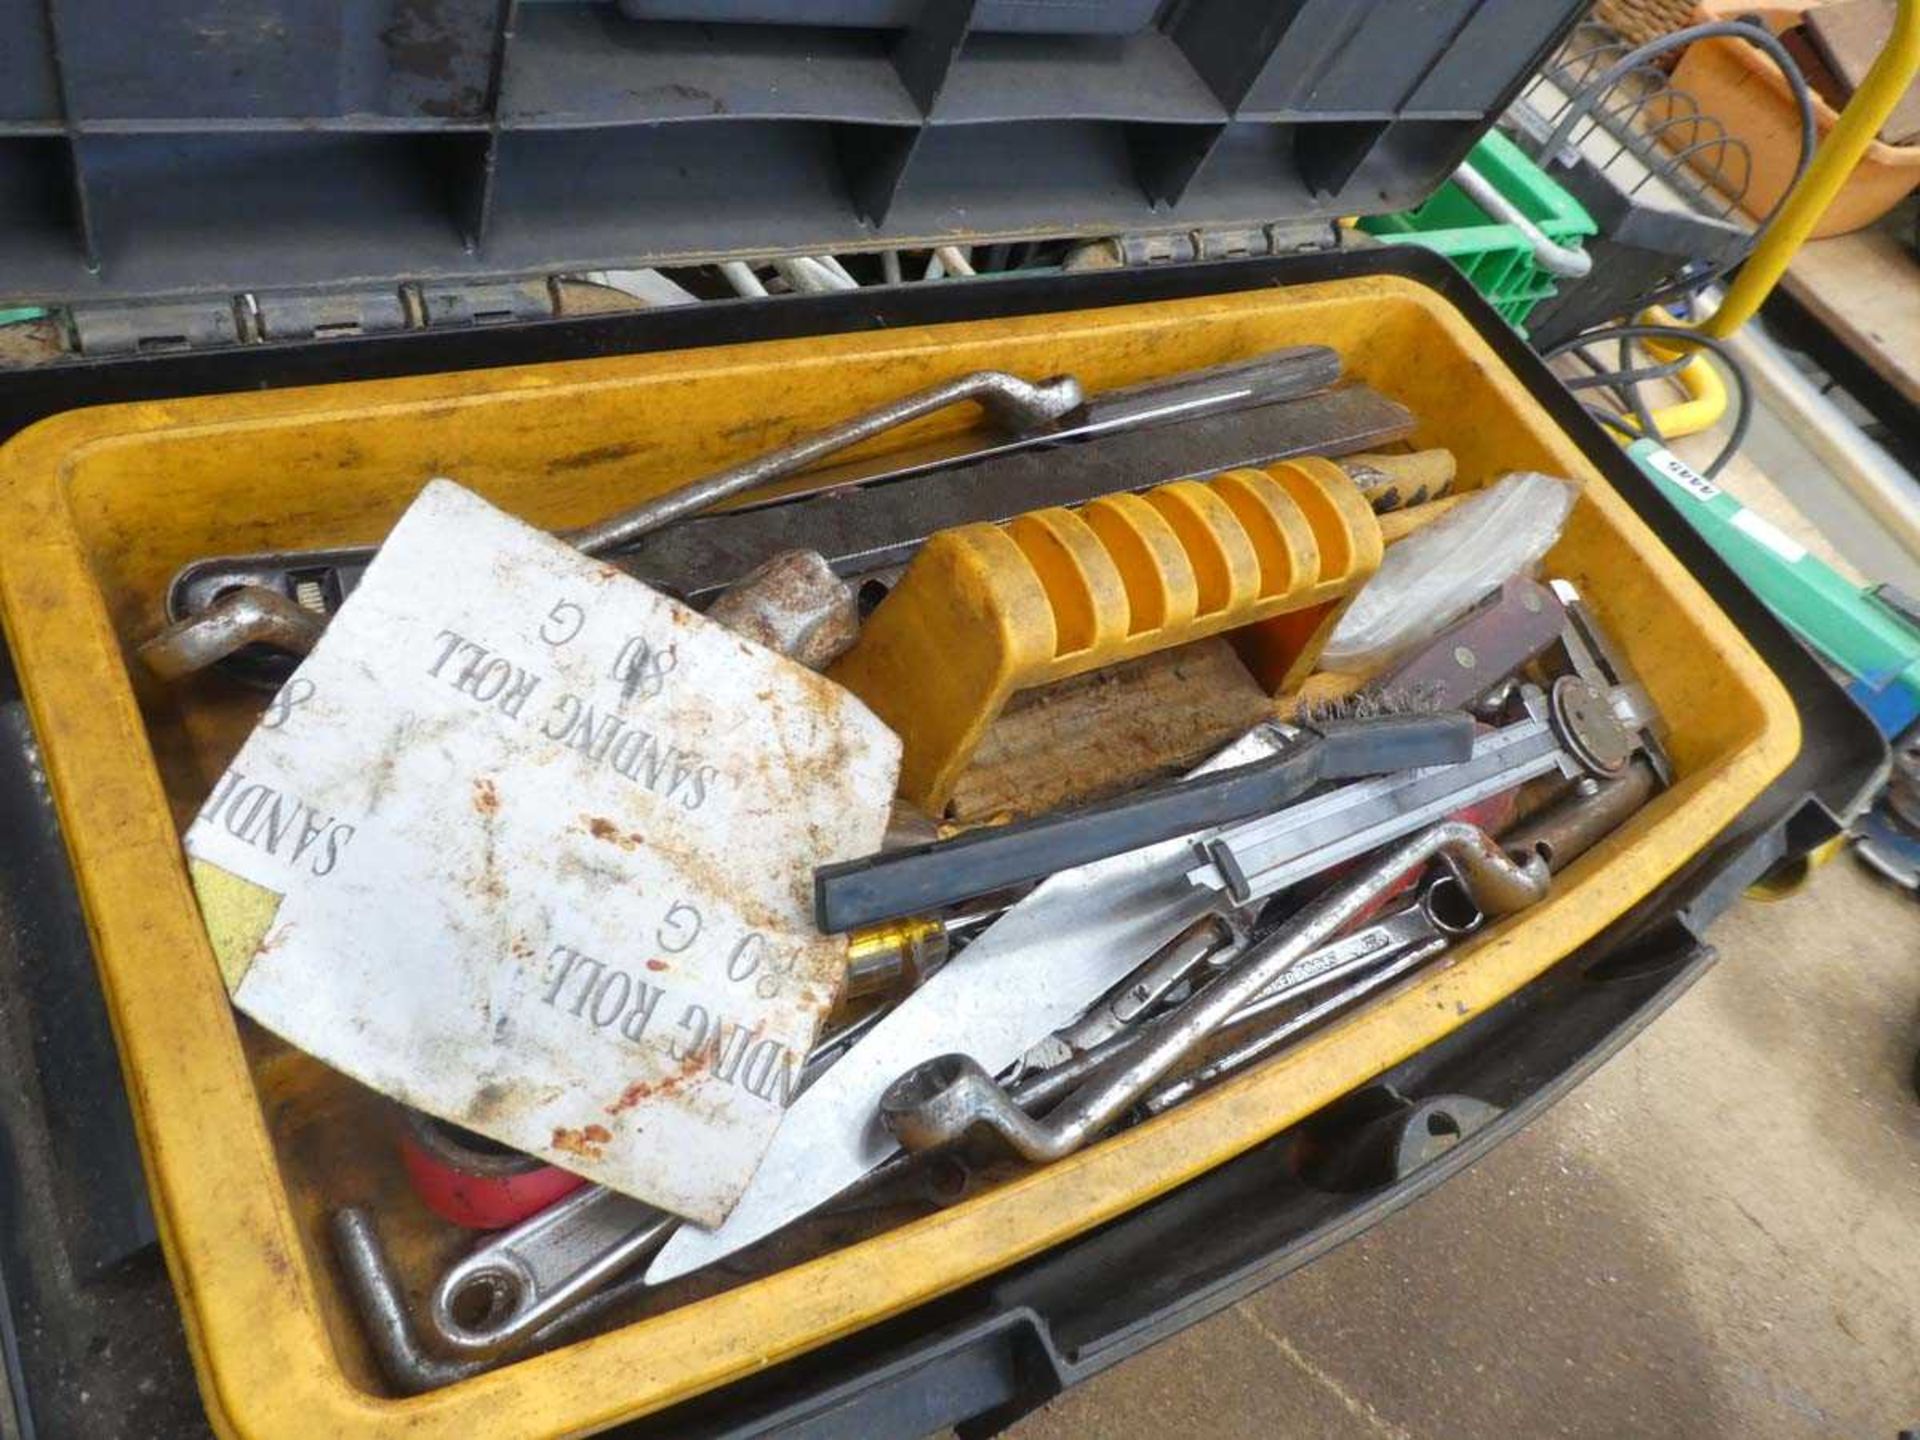 2 crates and toolbox containing clamps, cloggs, tile rippers, extension cables, tools etc - Image 2 of 2